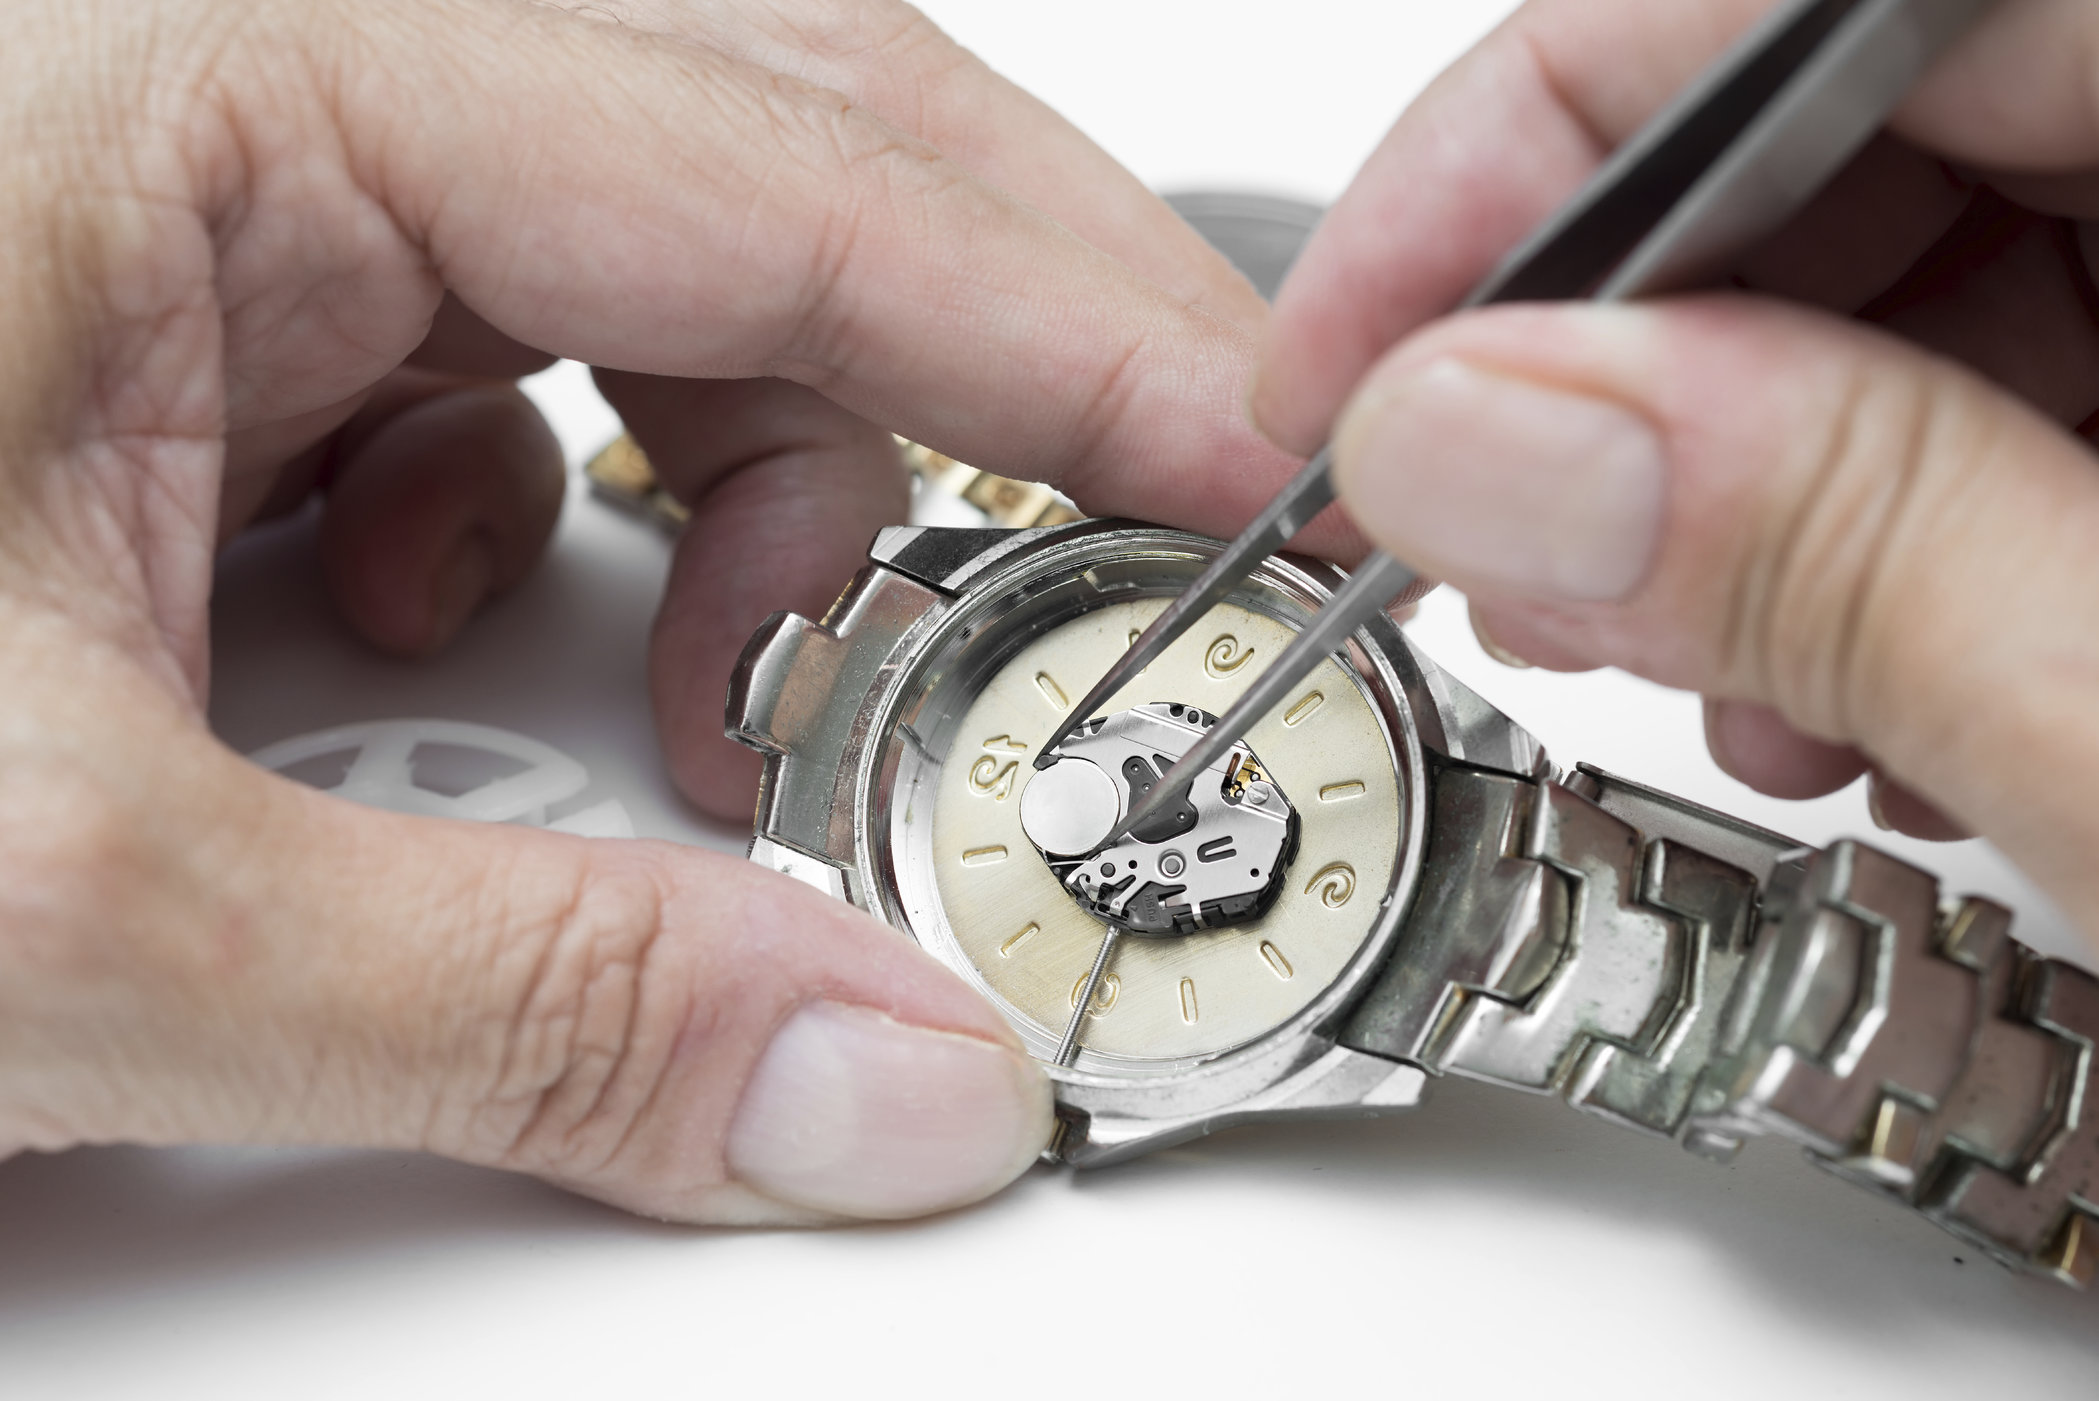 How To Change Battery In Michael Kors Watch